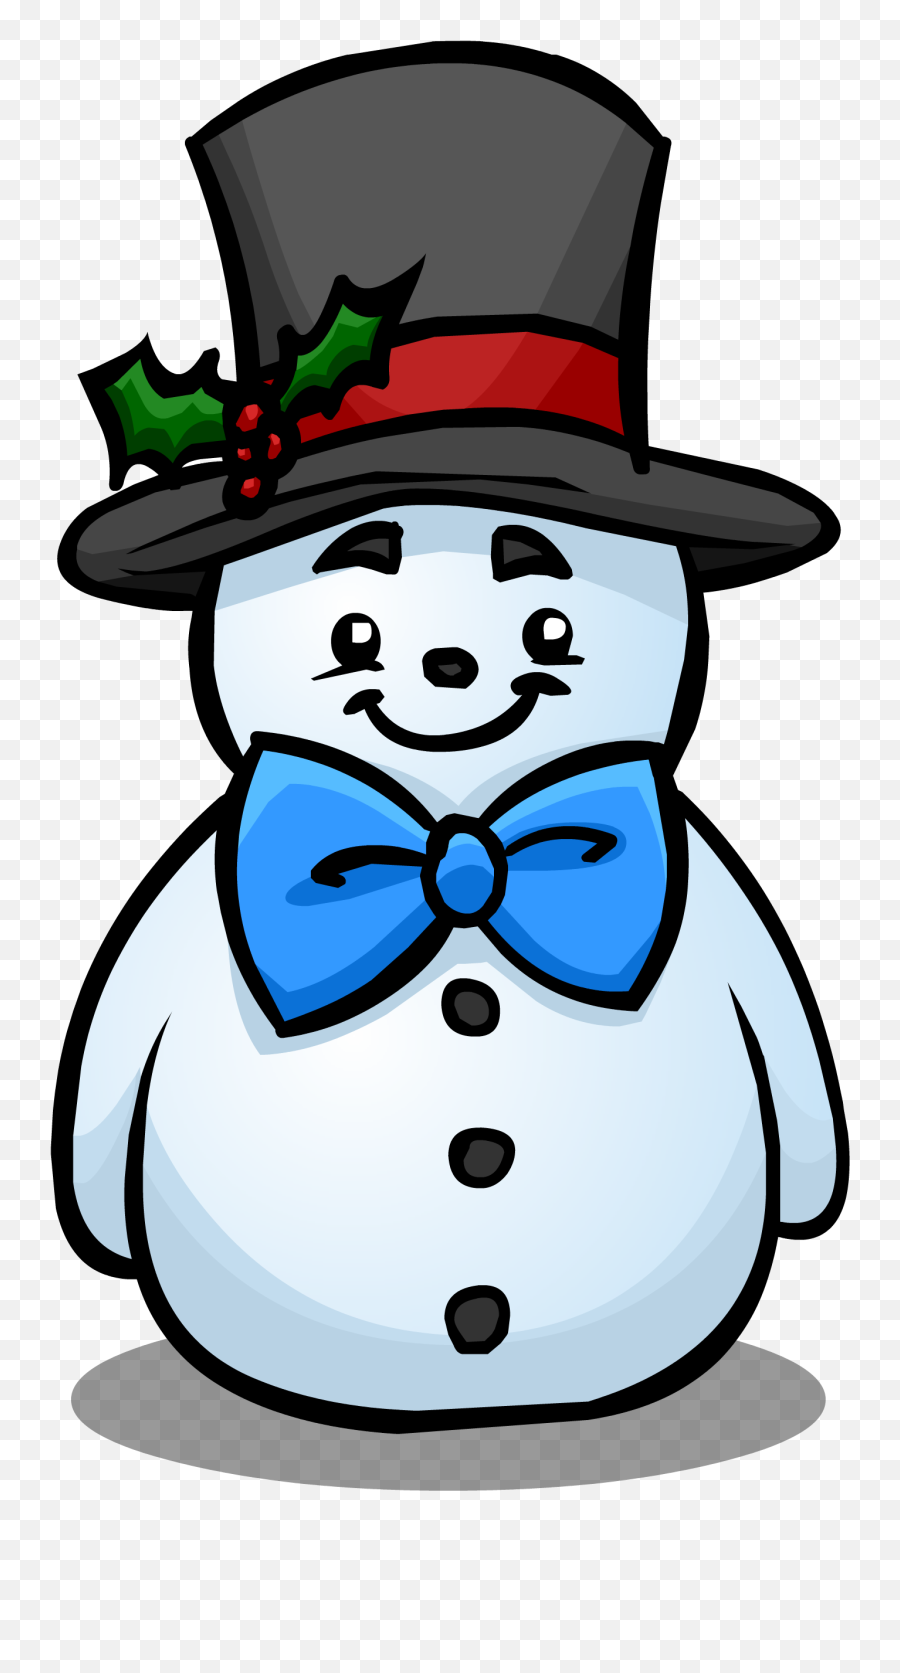 Snowman With Top Hat Clipart - Top Hat For A Snowman Emoji,Top Hat Emoji